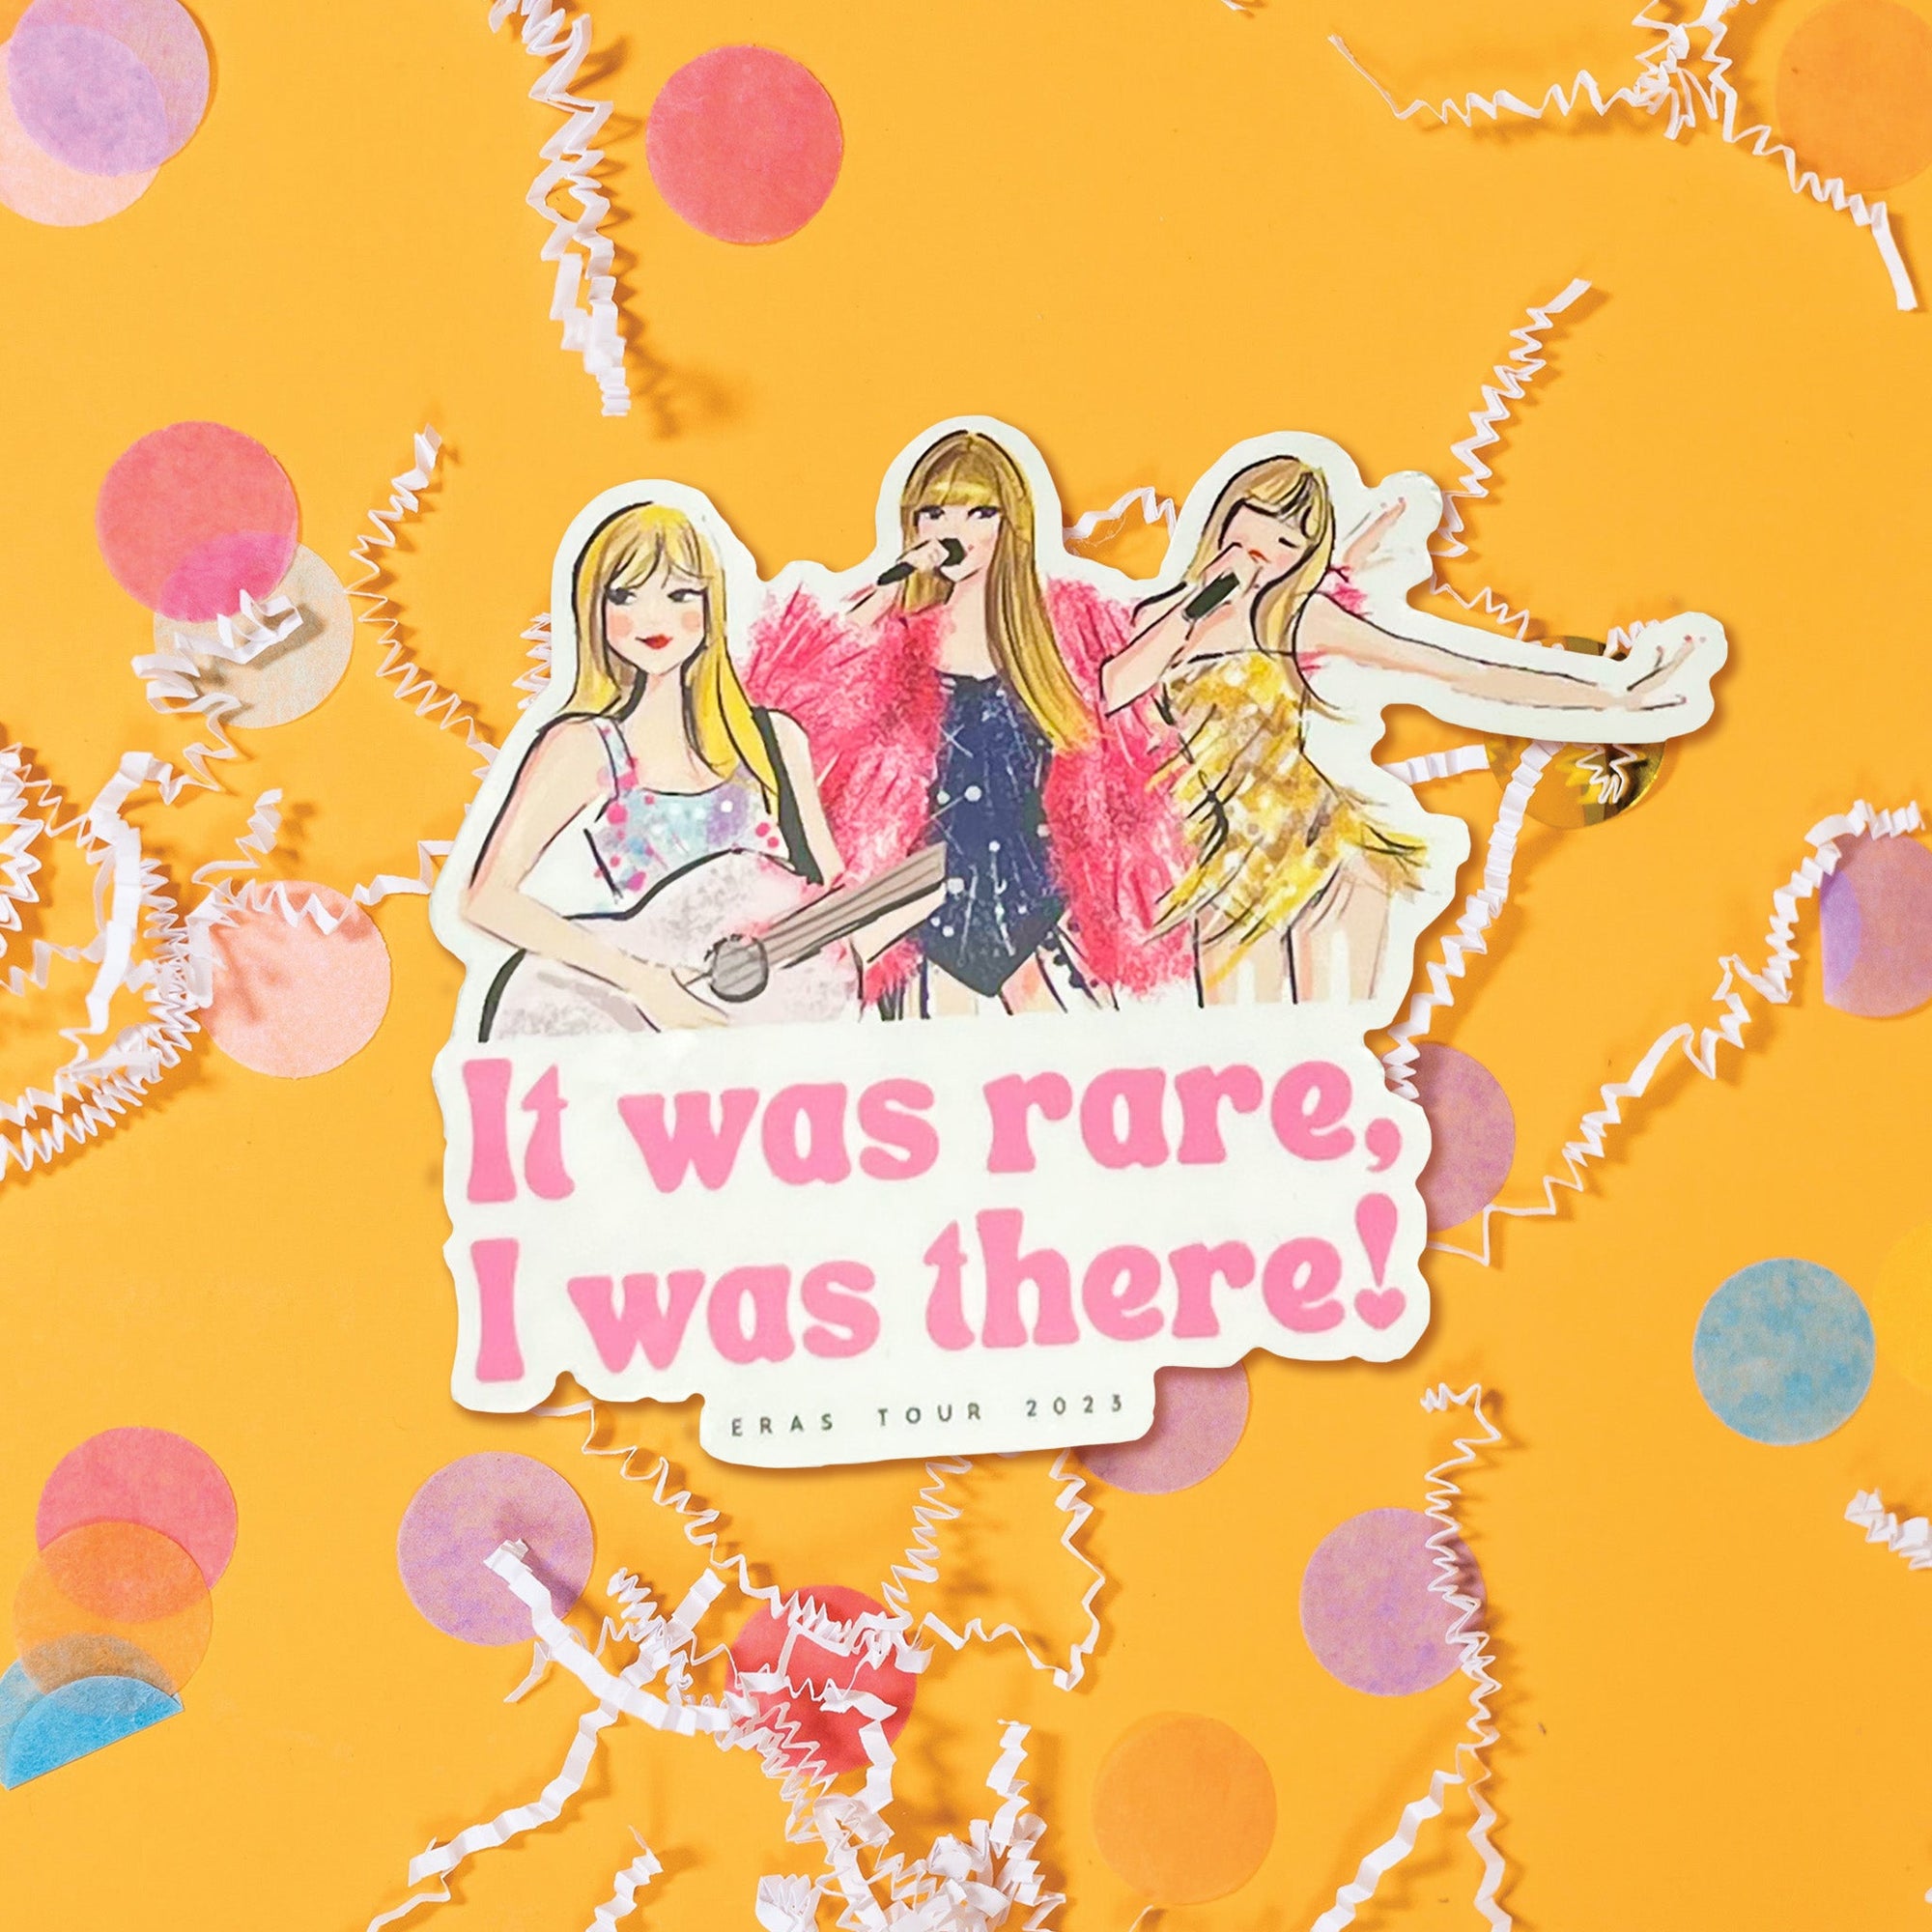 On a sunny mustard background sits a sticker with white crinkle and big, colorful confetti scattered around.Taylor Swift inspired sticker says is an illustration of three different Taylor Swifts dressed in different costumes. It says "It was rare, I was there!" in bubble gum pink, fat font. It also says "ERAS TOUR 2023" in black lettering.